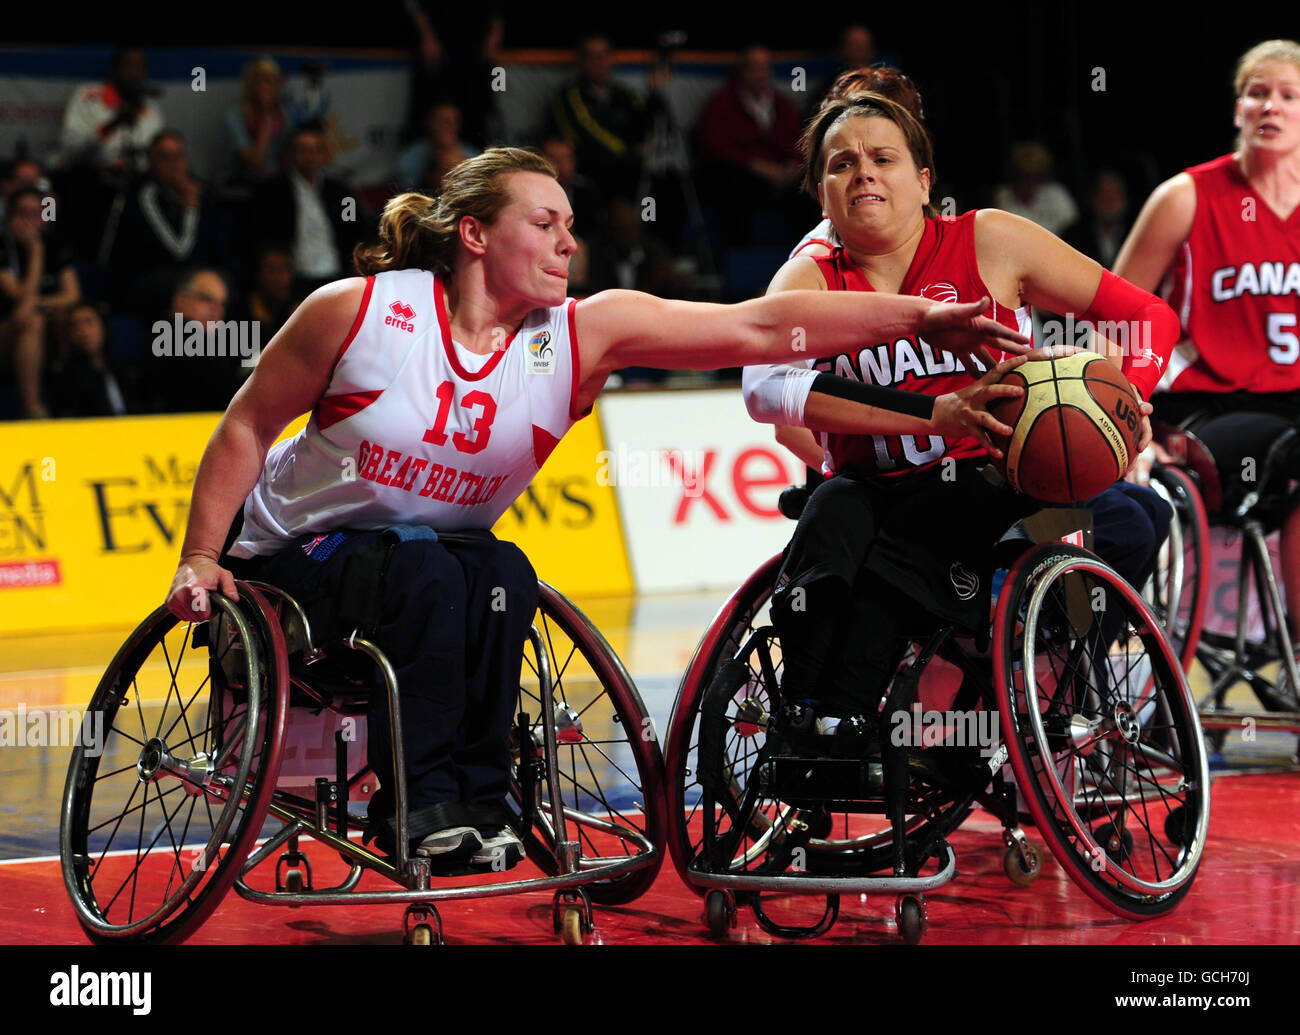 Paralympics - BT Paralympic World Cup 2010 - Day Three - Manchester. Canada's Katie Harnock battles past Great Britain's Louise Sugden (left) during their Wheelchair basketball game Stock Photo